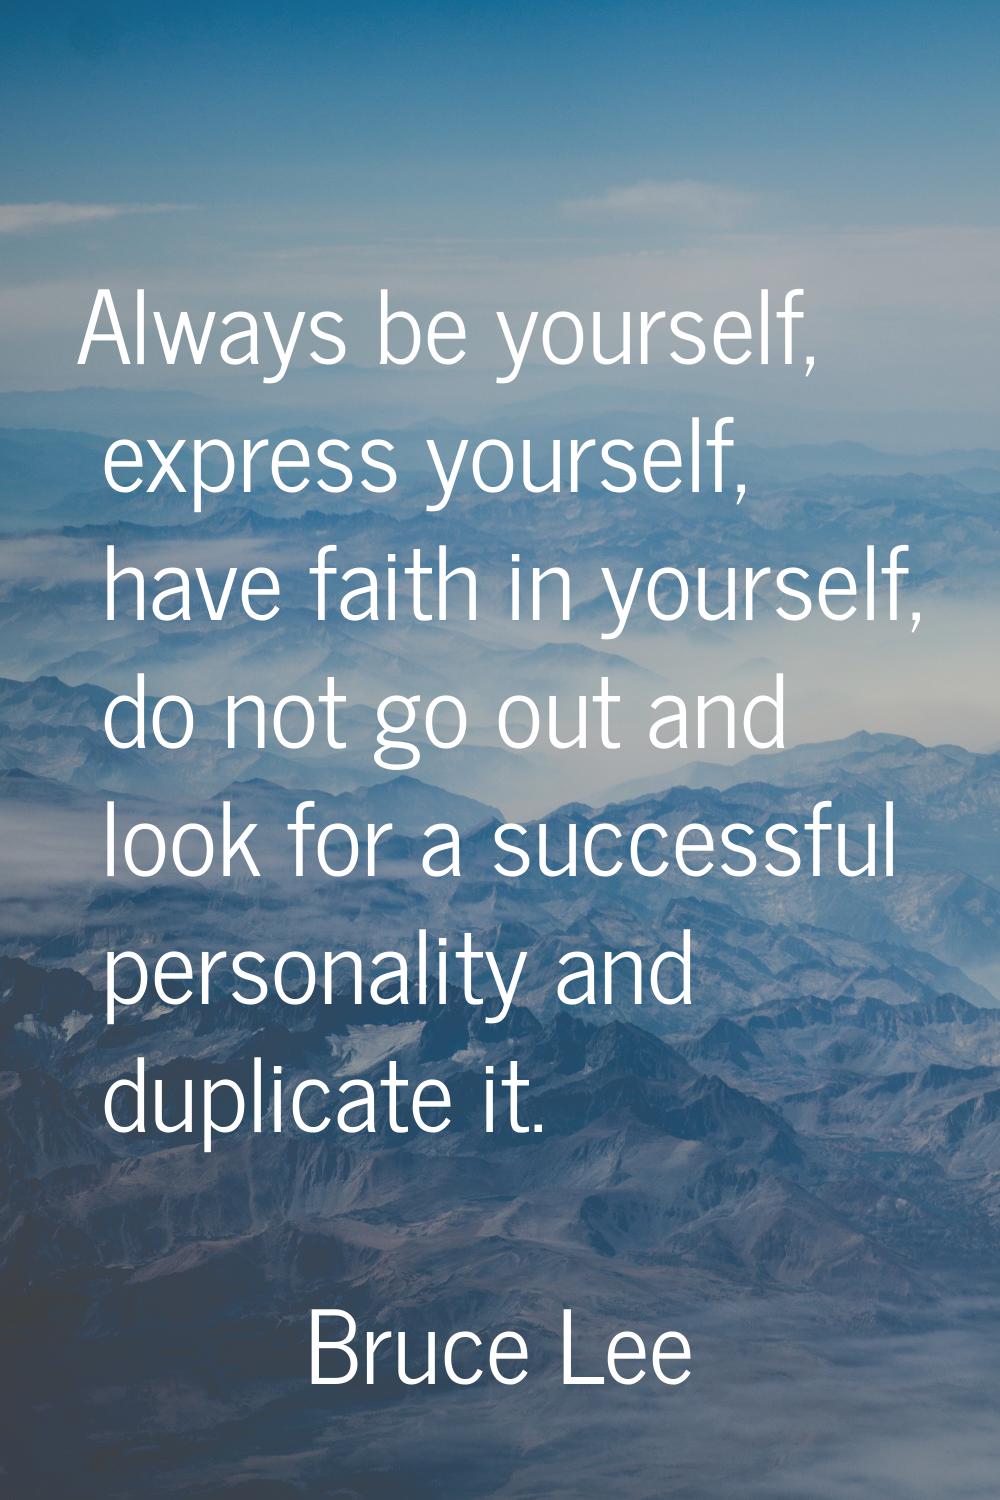 Always be yourself, express yourself, have faith in yourself, do not go out and look for a successf